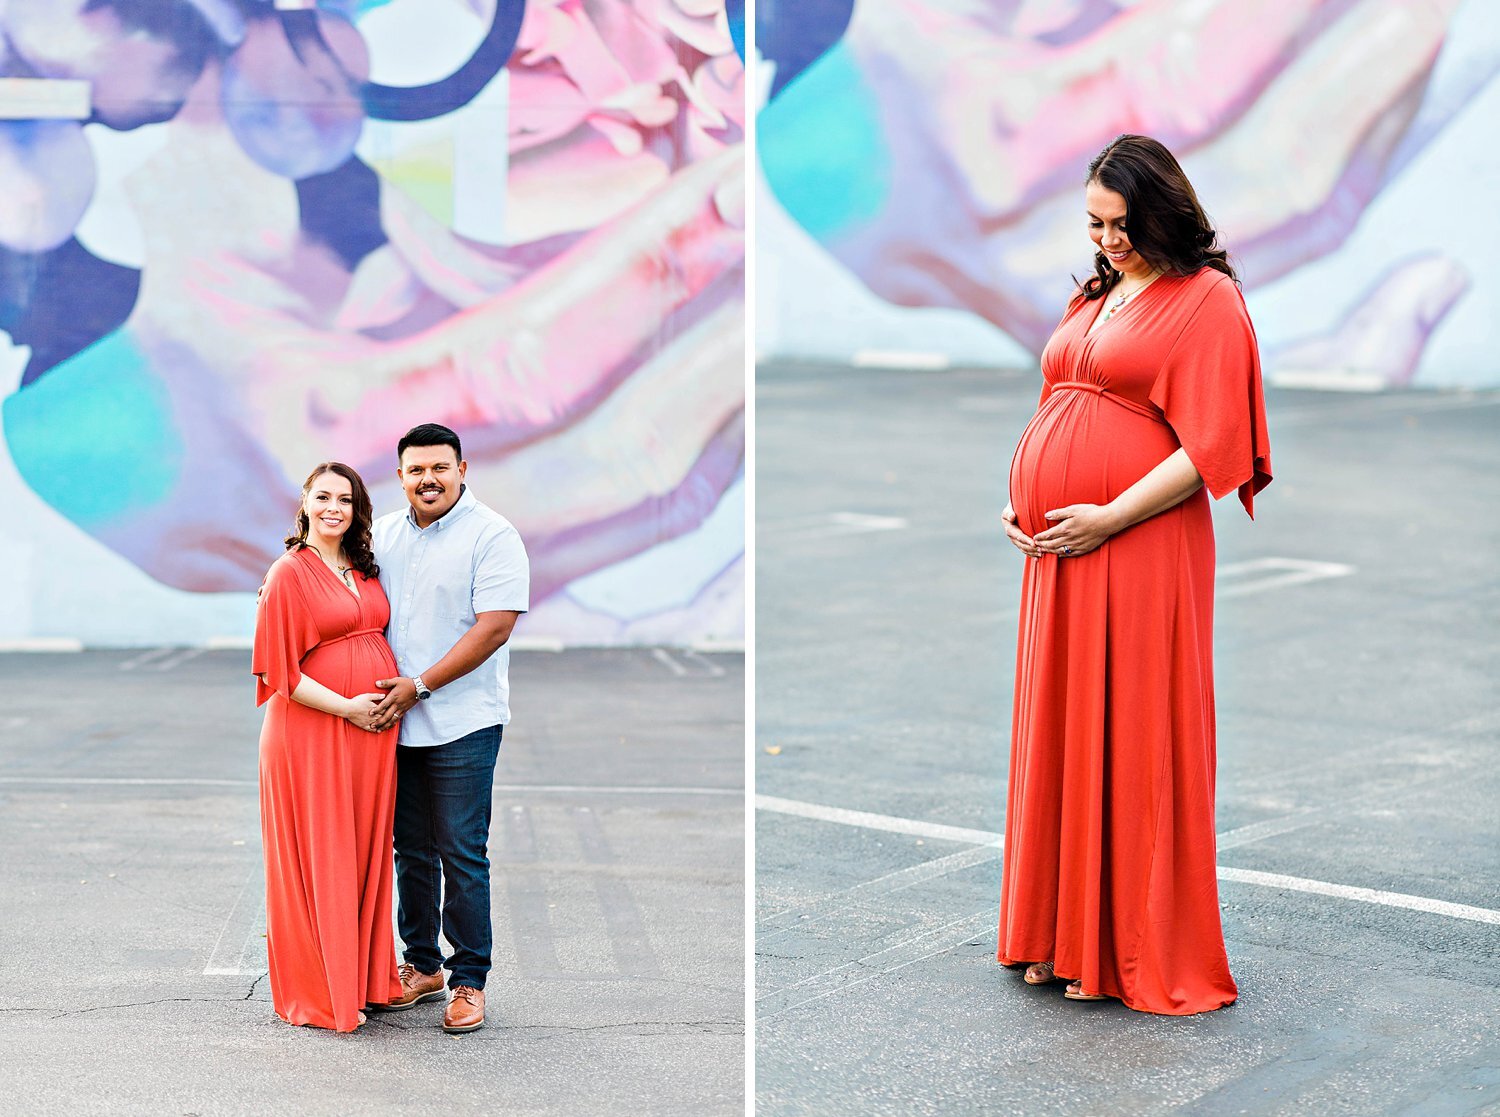 Los Angeles Arts District Engagement Session - Estee and Jose_0041.jpg